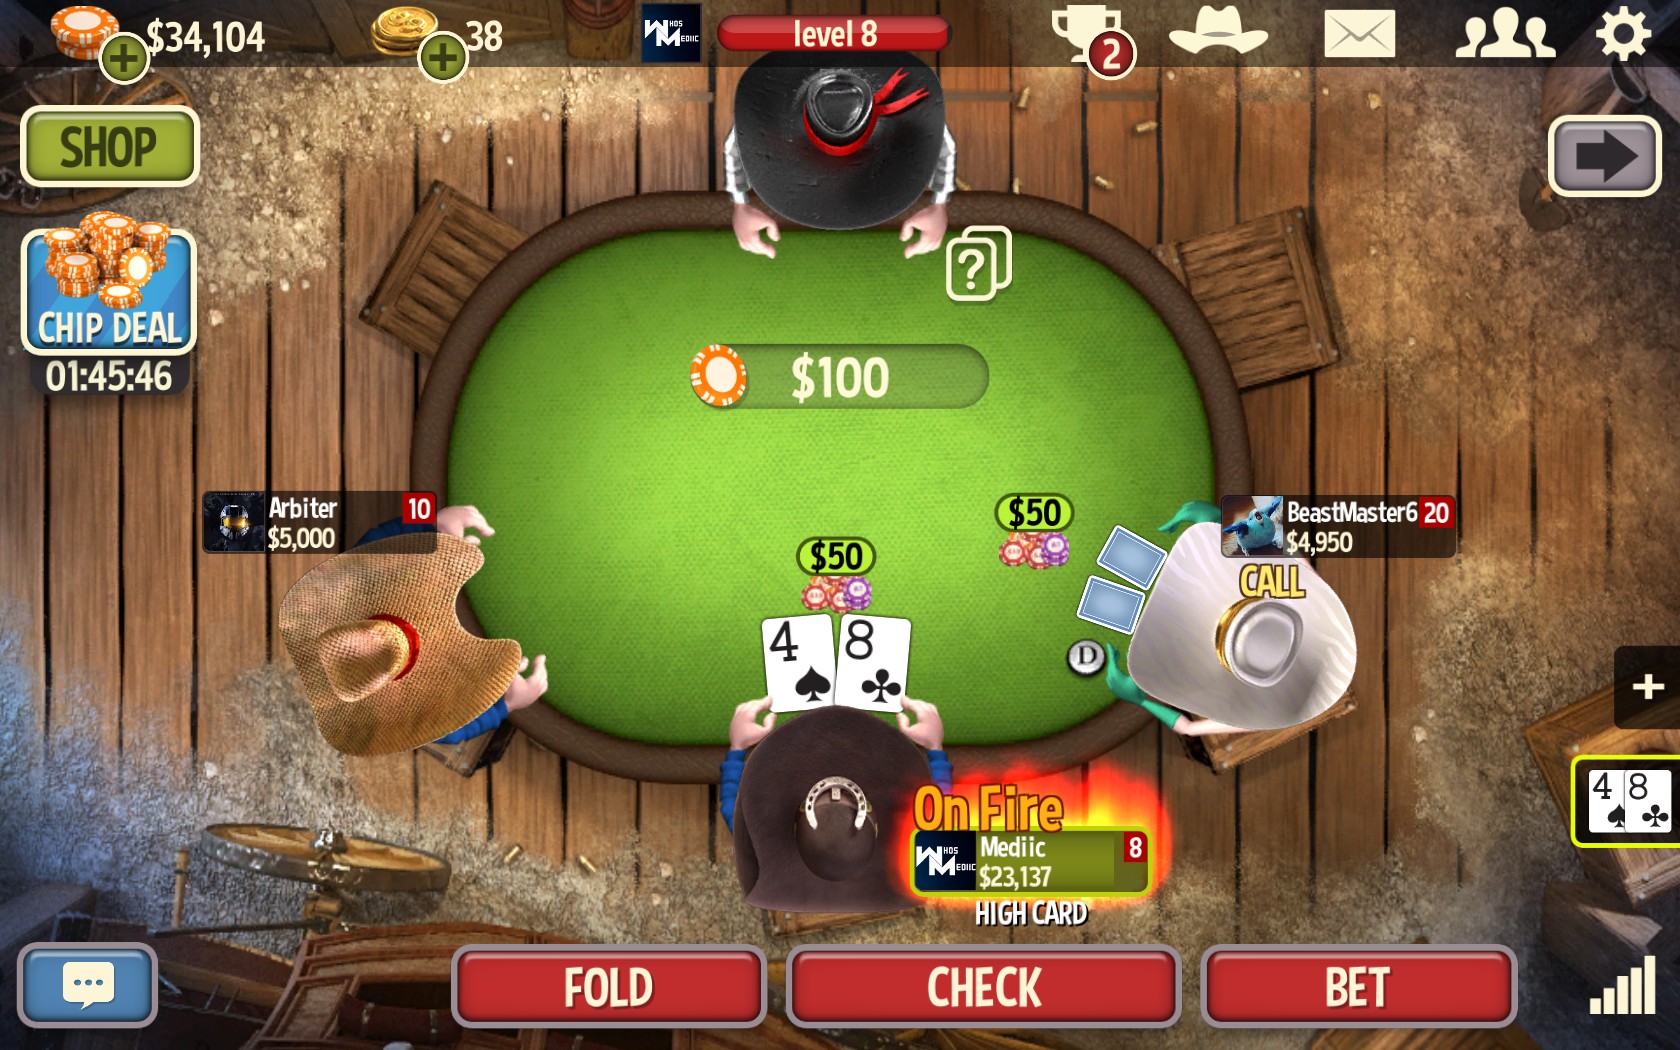 governor of poker 3 tips